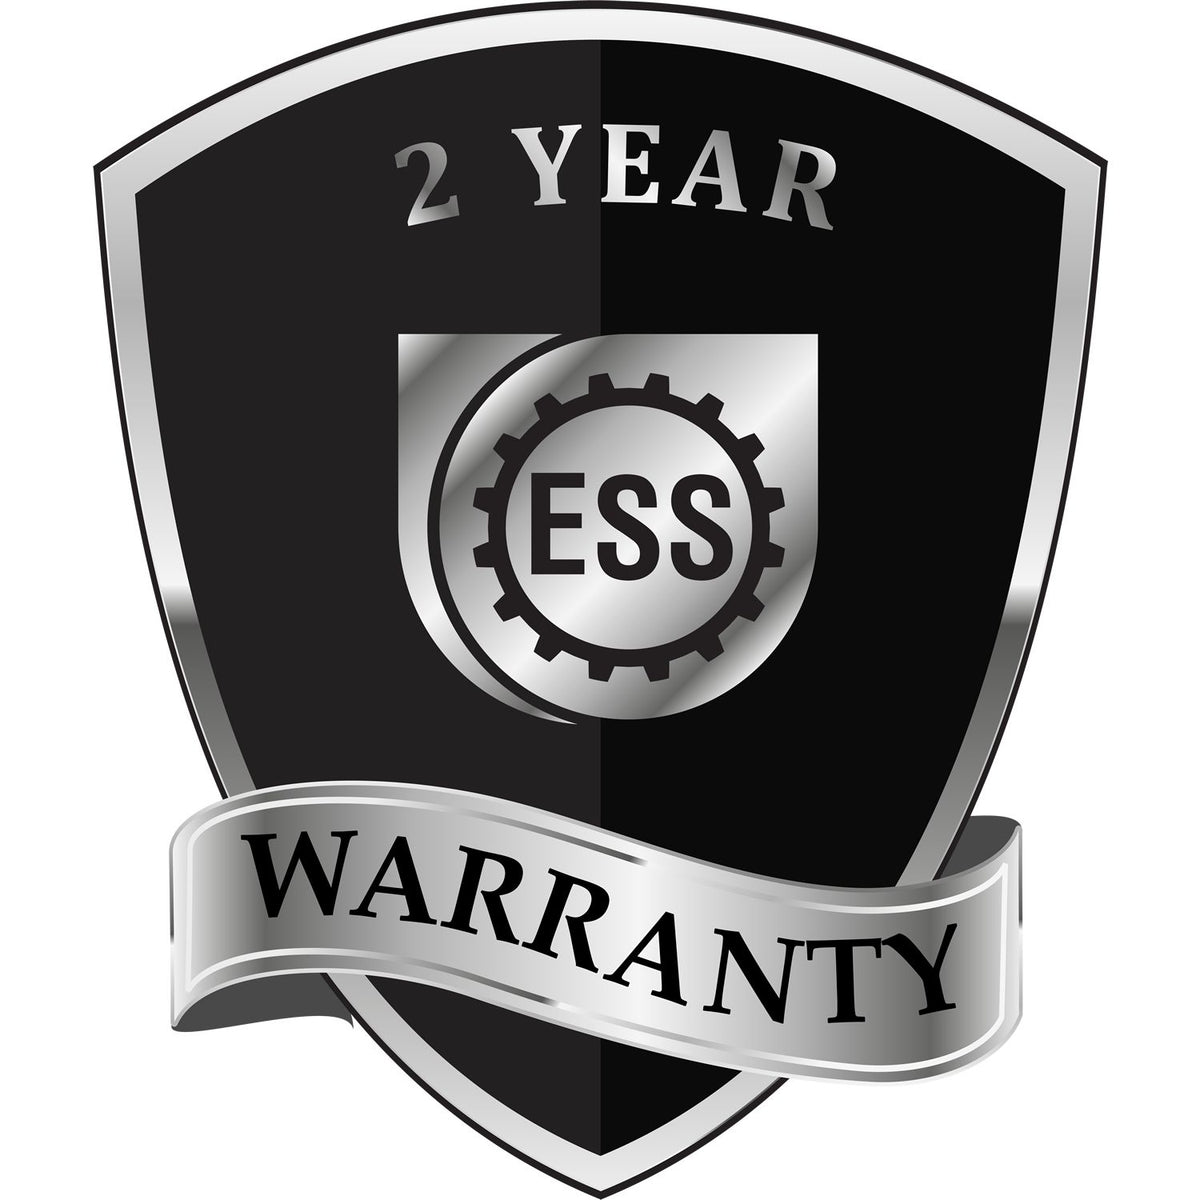 A badge or emblem showing a warranty icon for the Alaska Engineer Desk Seal